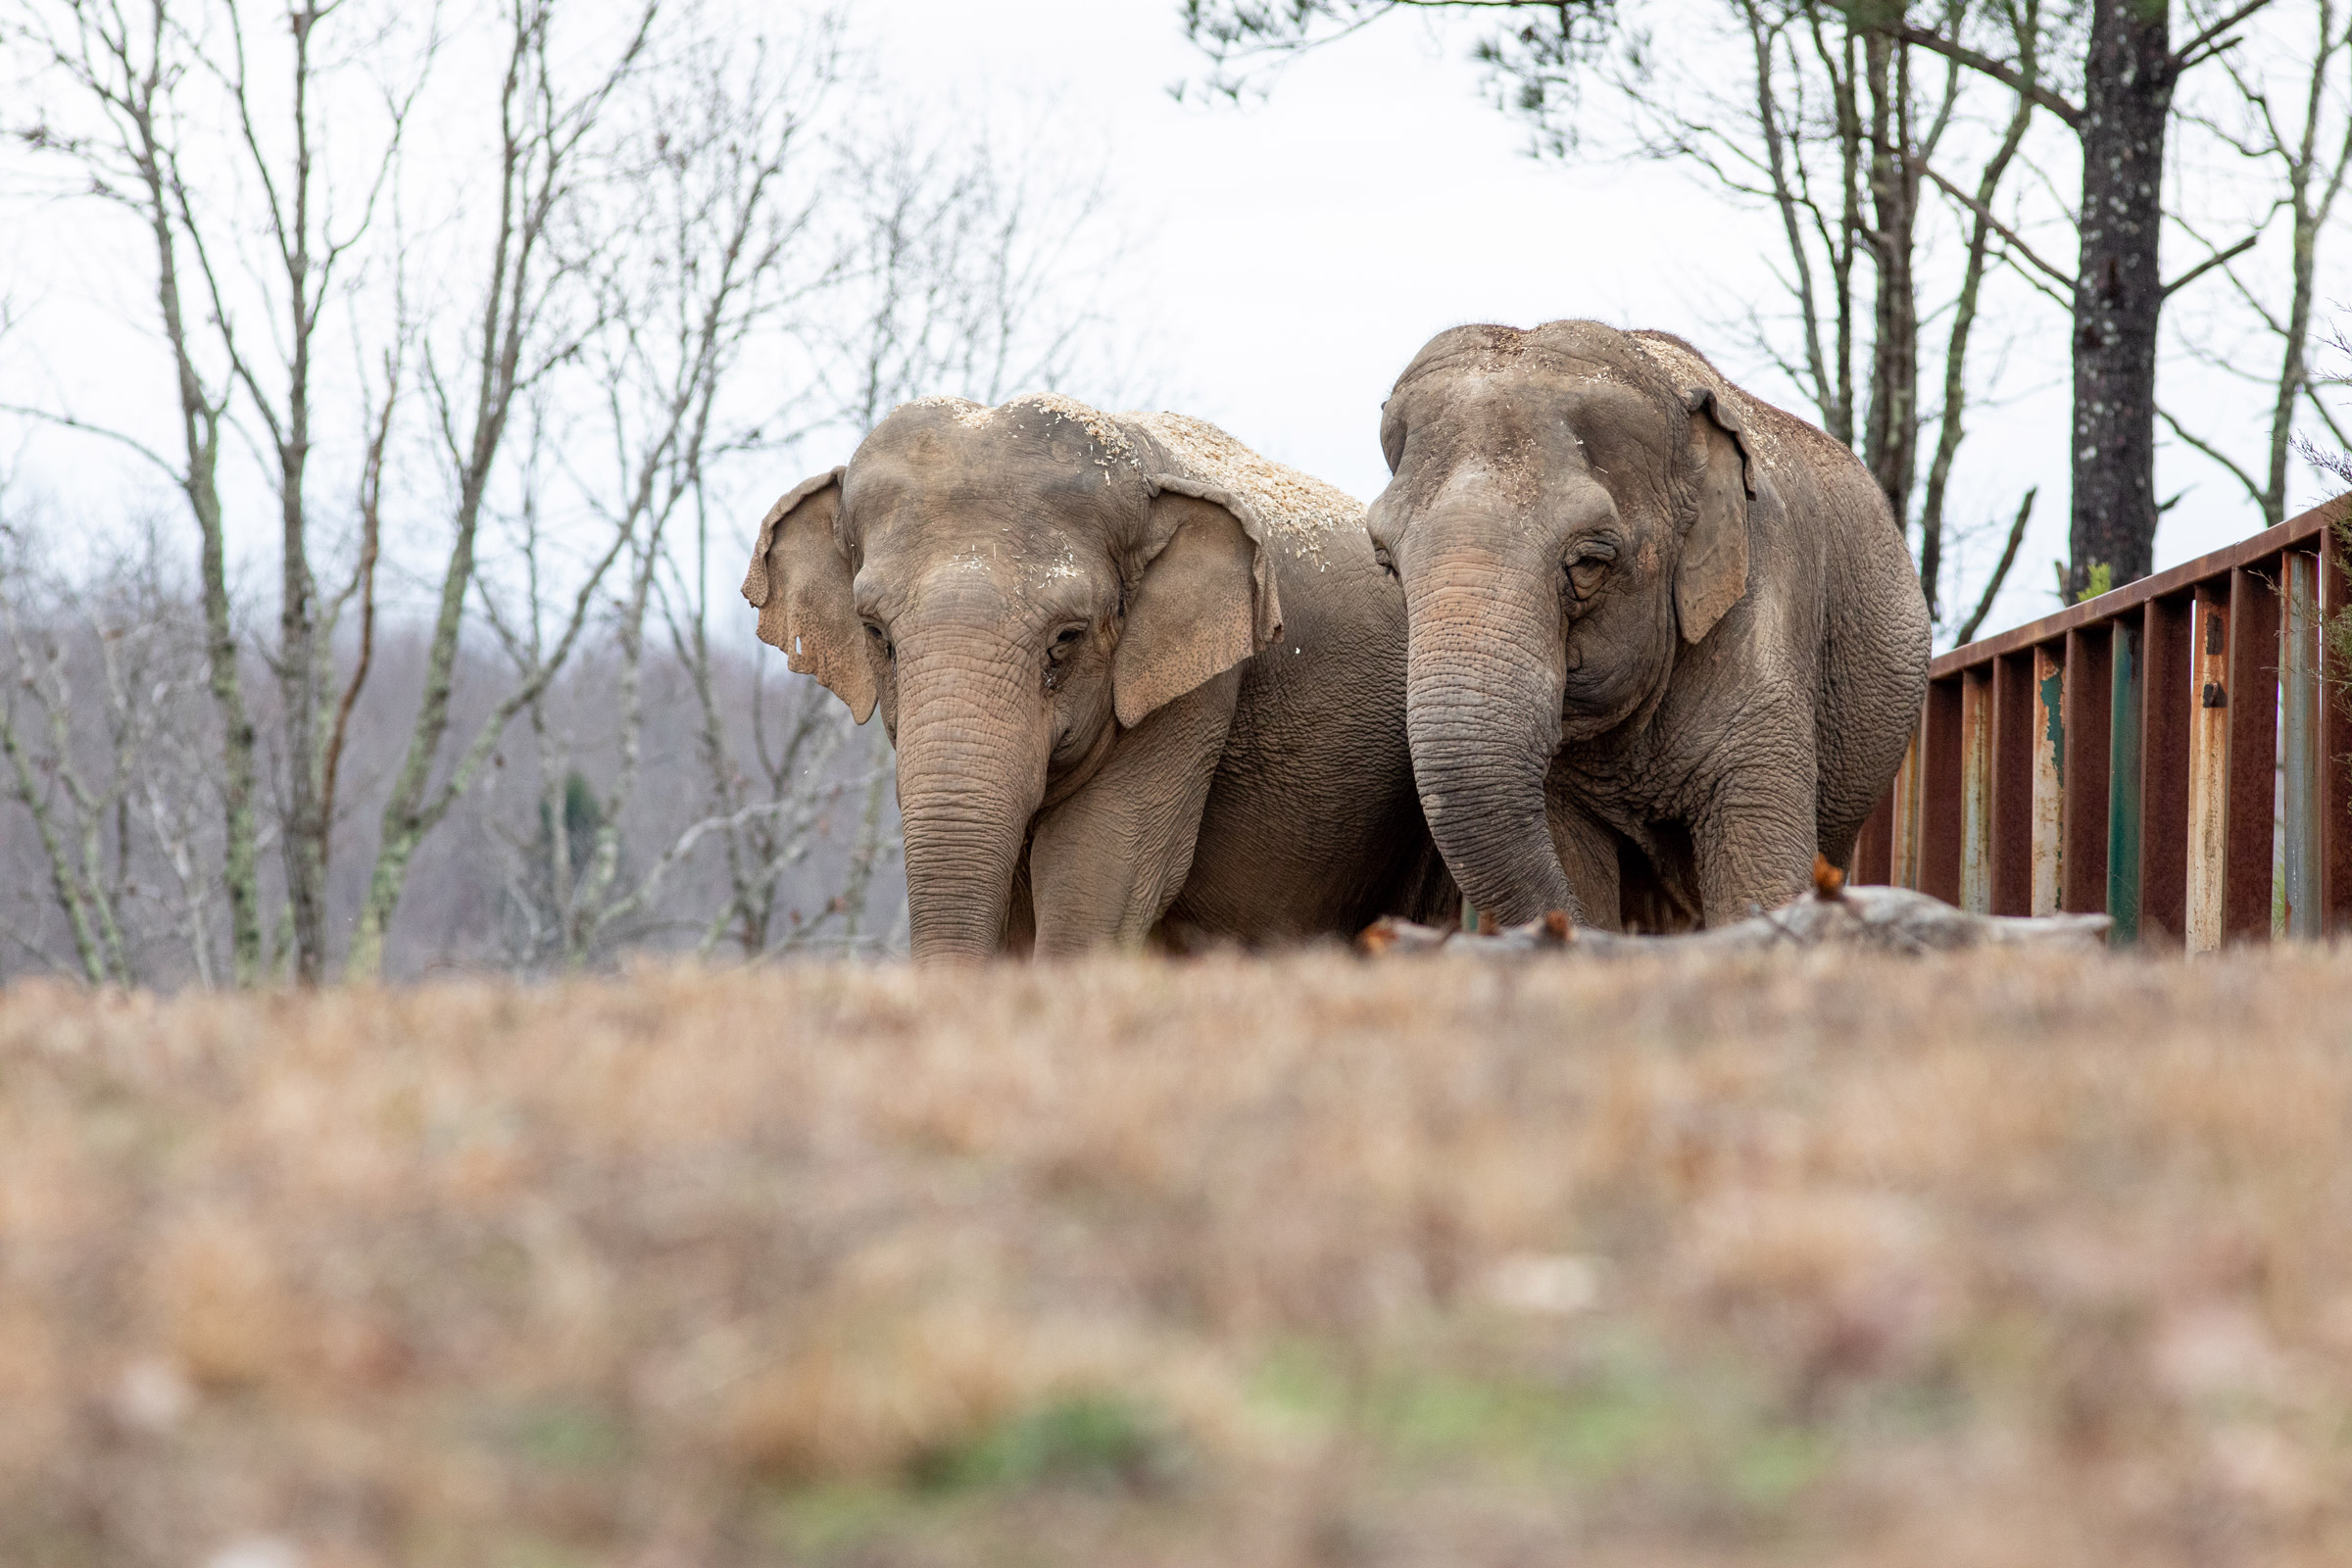 Two Asian elephants in a middle Tennessee outdoor habitat